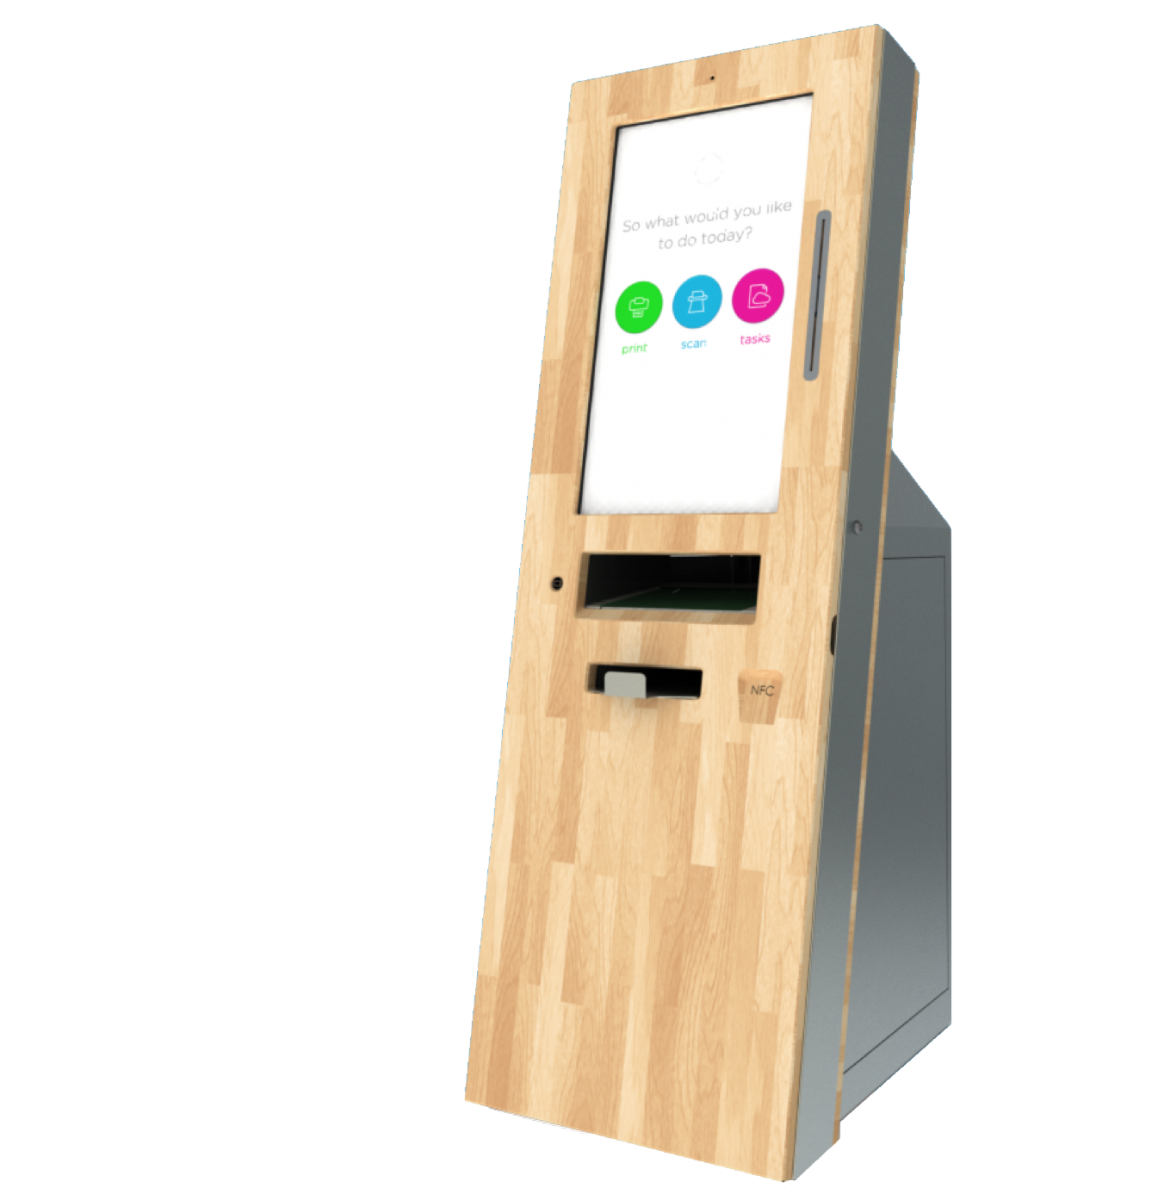 Students and guests to campus can now print to kiosks in locations across campus using a new service from Information Technology Services.